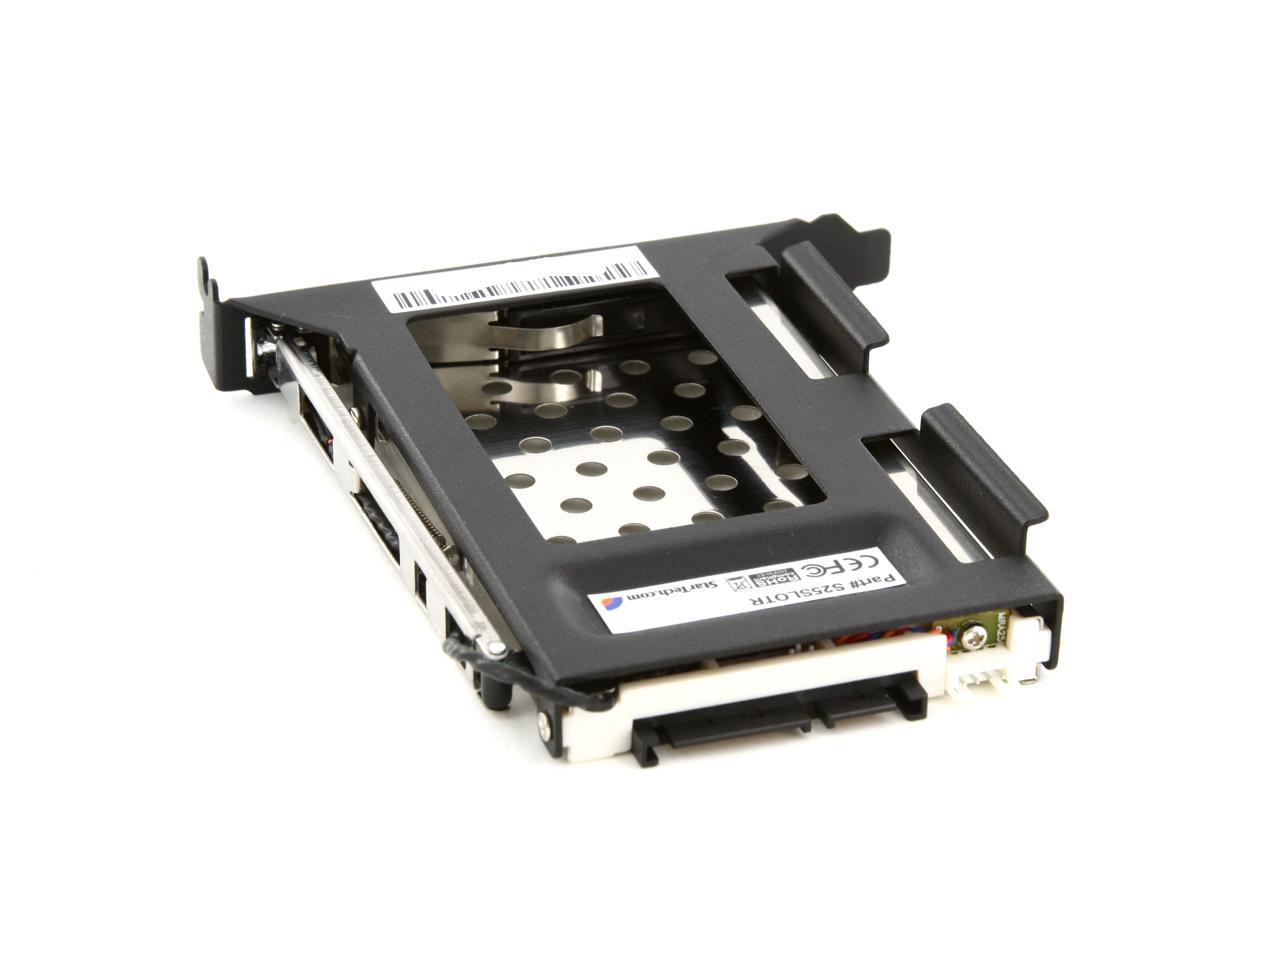 StarTech.com S25SLOTR 2.5in SATA Removable Hard Drive Bay for PC Expansion  Slot - Newegg.com